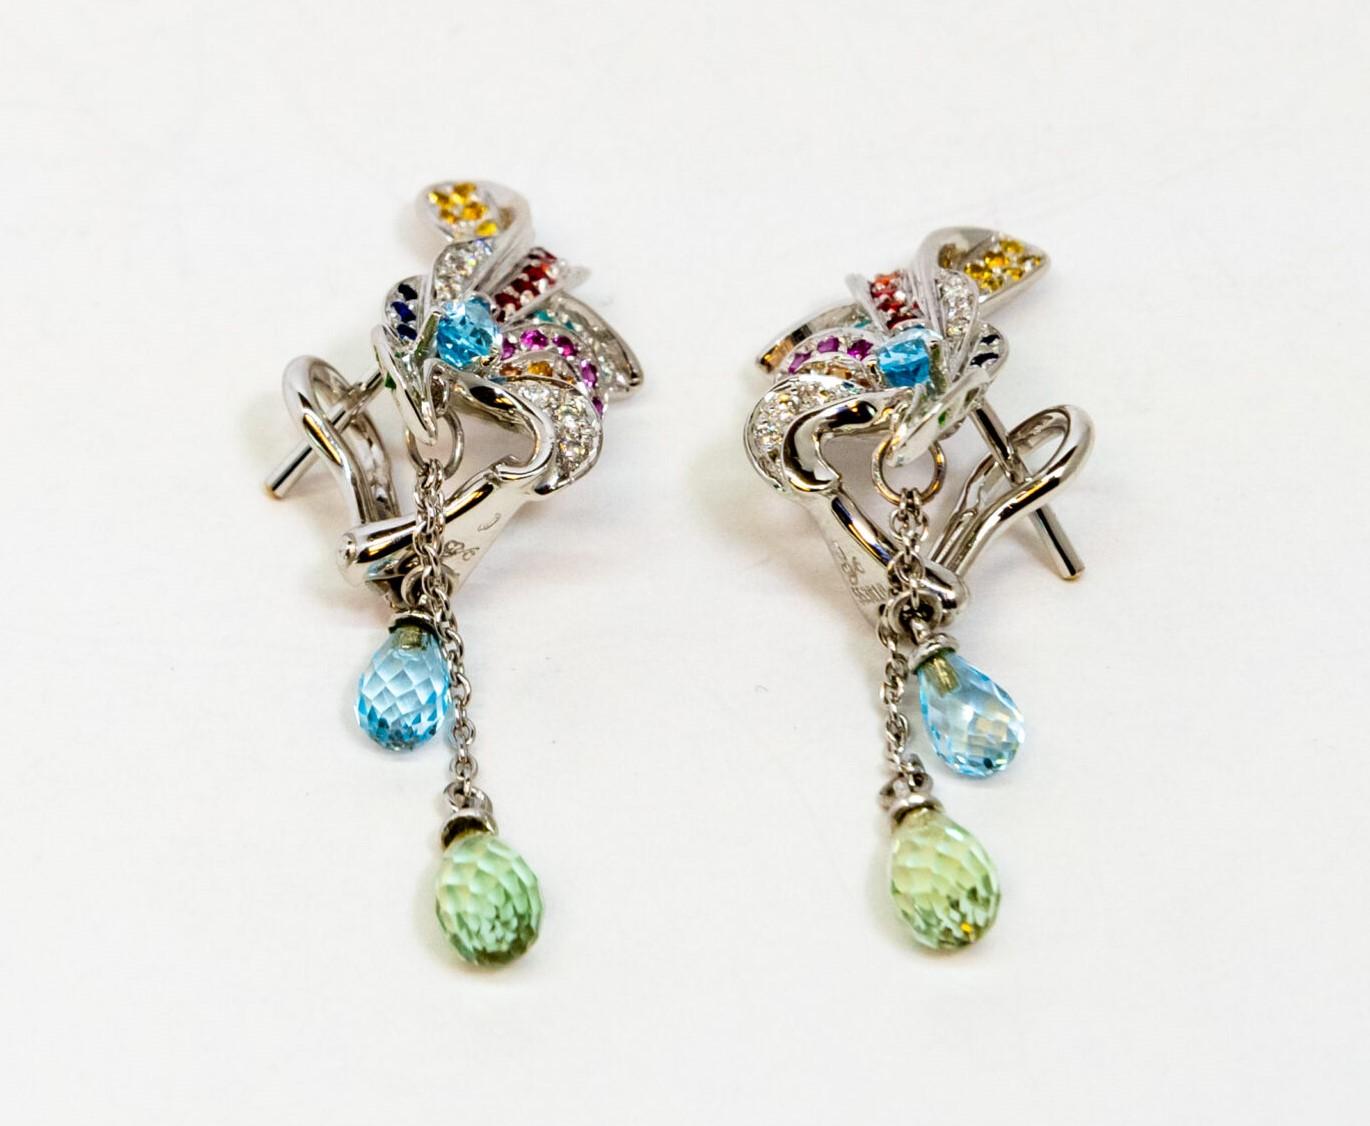 This 18K White Gold plug earring. Unique-shaped 18K White gold figures set with blue, pink, orange, red, white, green and yellow Sapphires and 2 teardrop Sapphires (green and blue). French back.

Dimensions: 5 cm x 1.2 cm